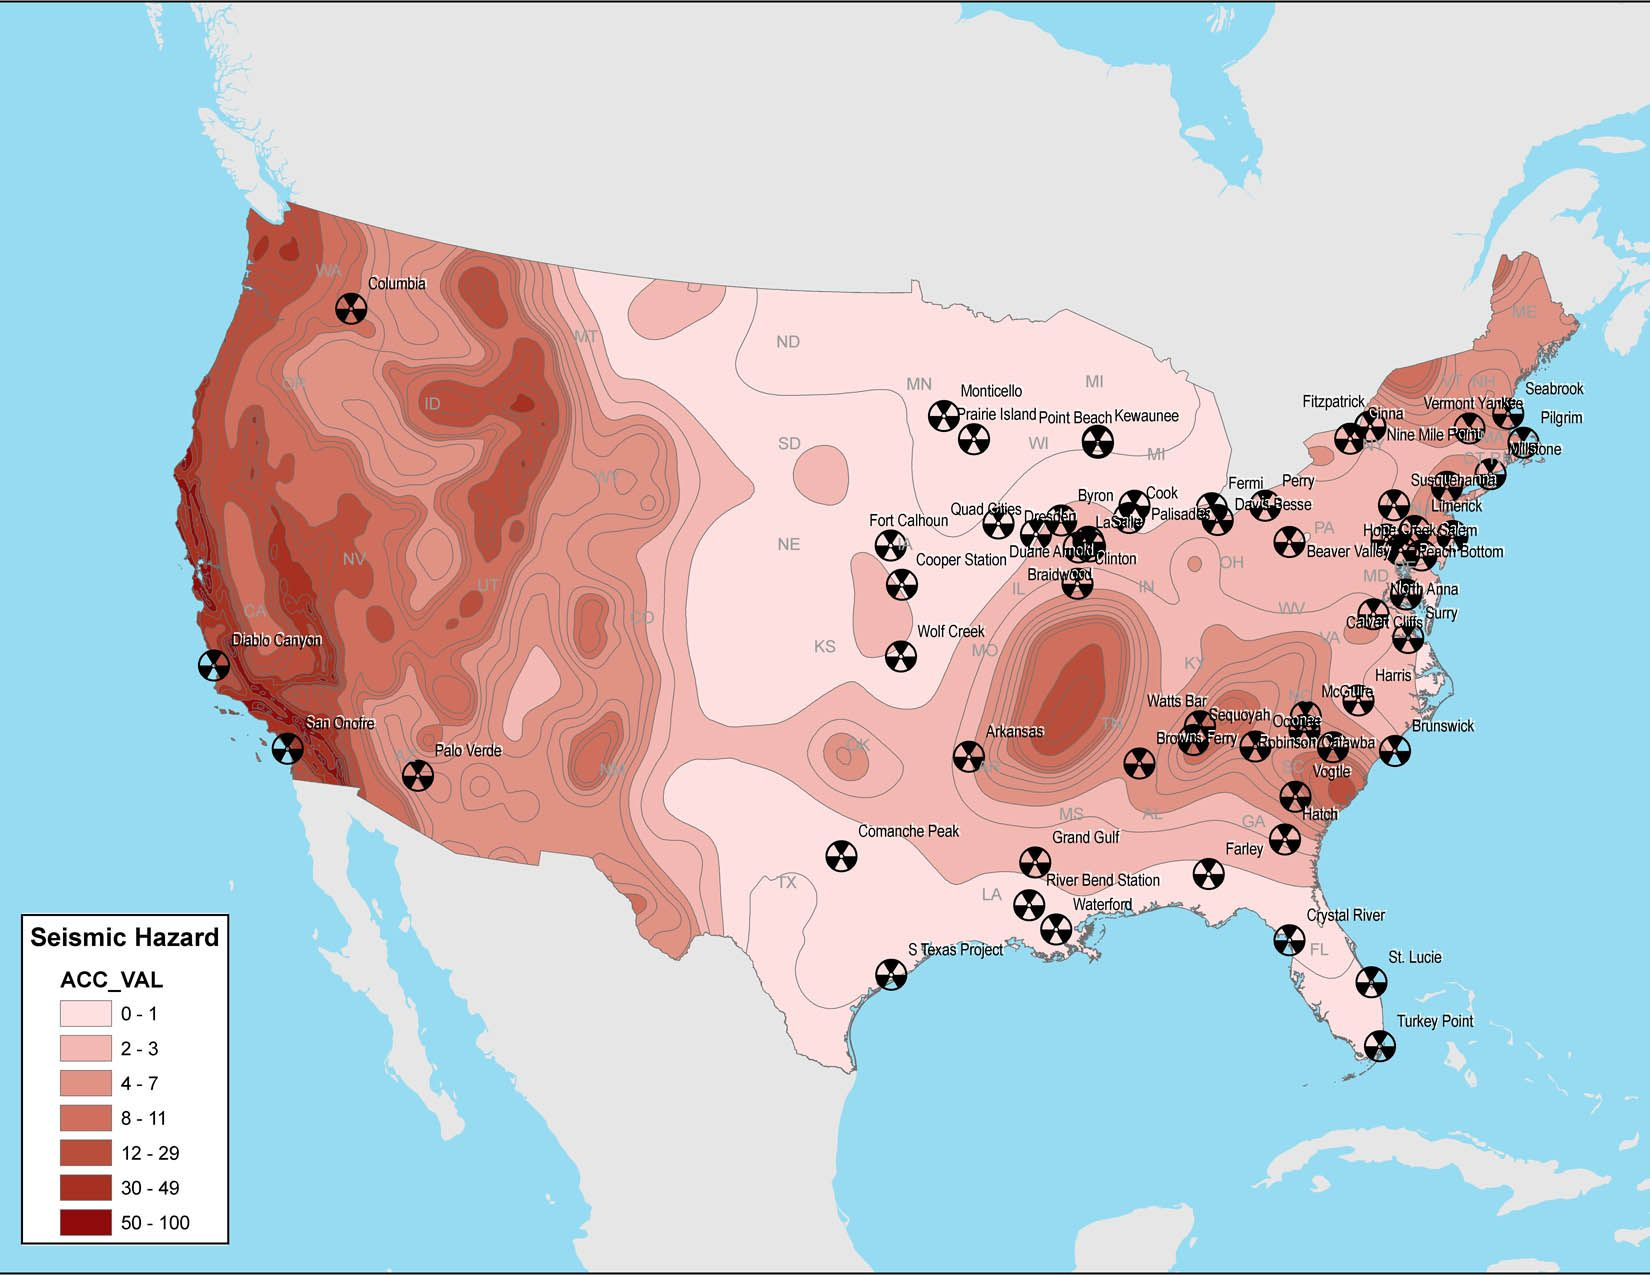 New Maps Of Nuclear Power Plants And Seismic Hazards In The United 